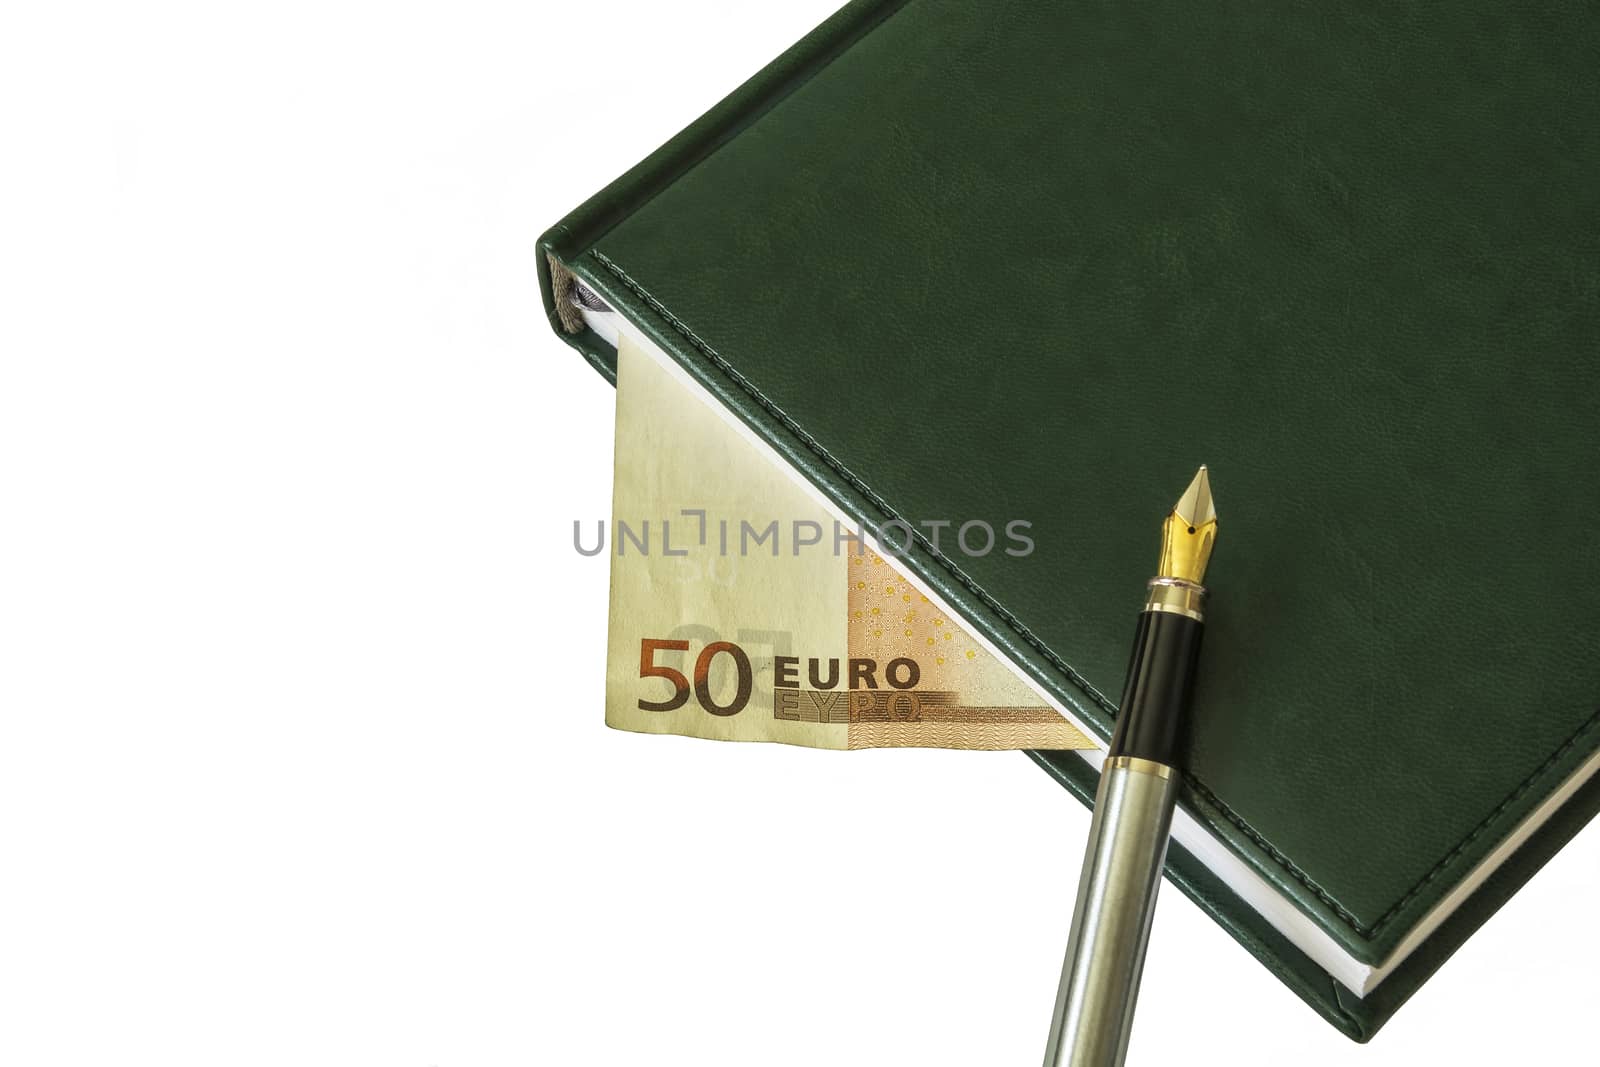 On the diary is a fountain pen. Between the sheets a bill of EUR 50 is visible